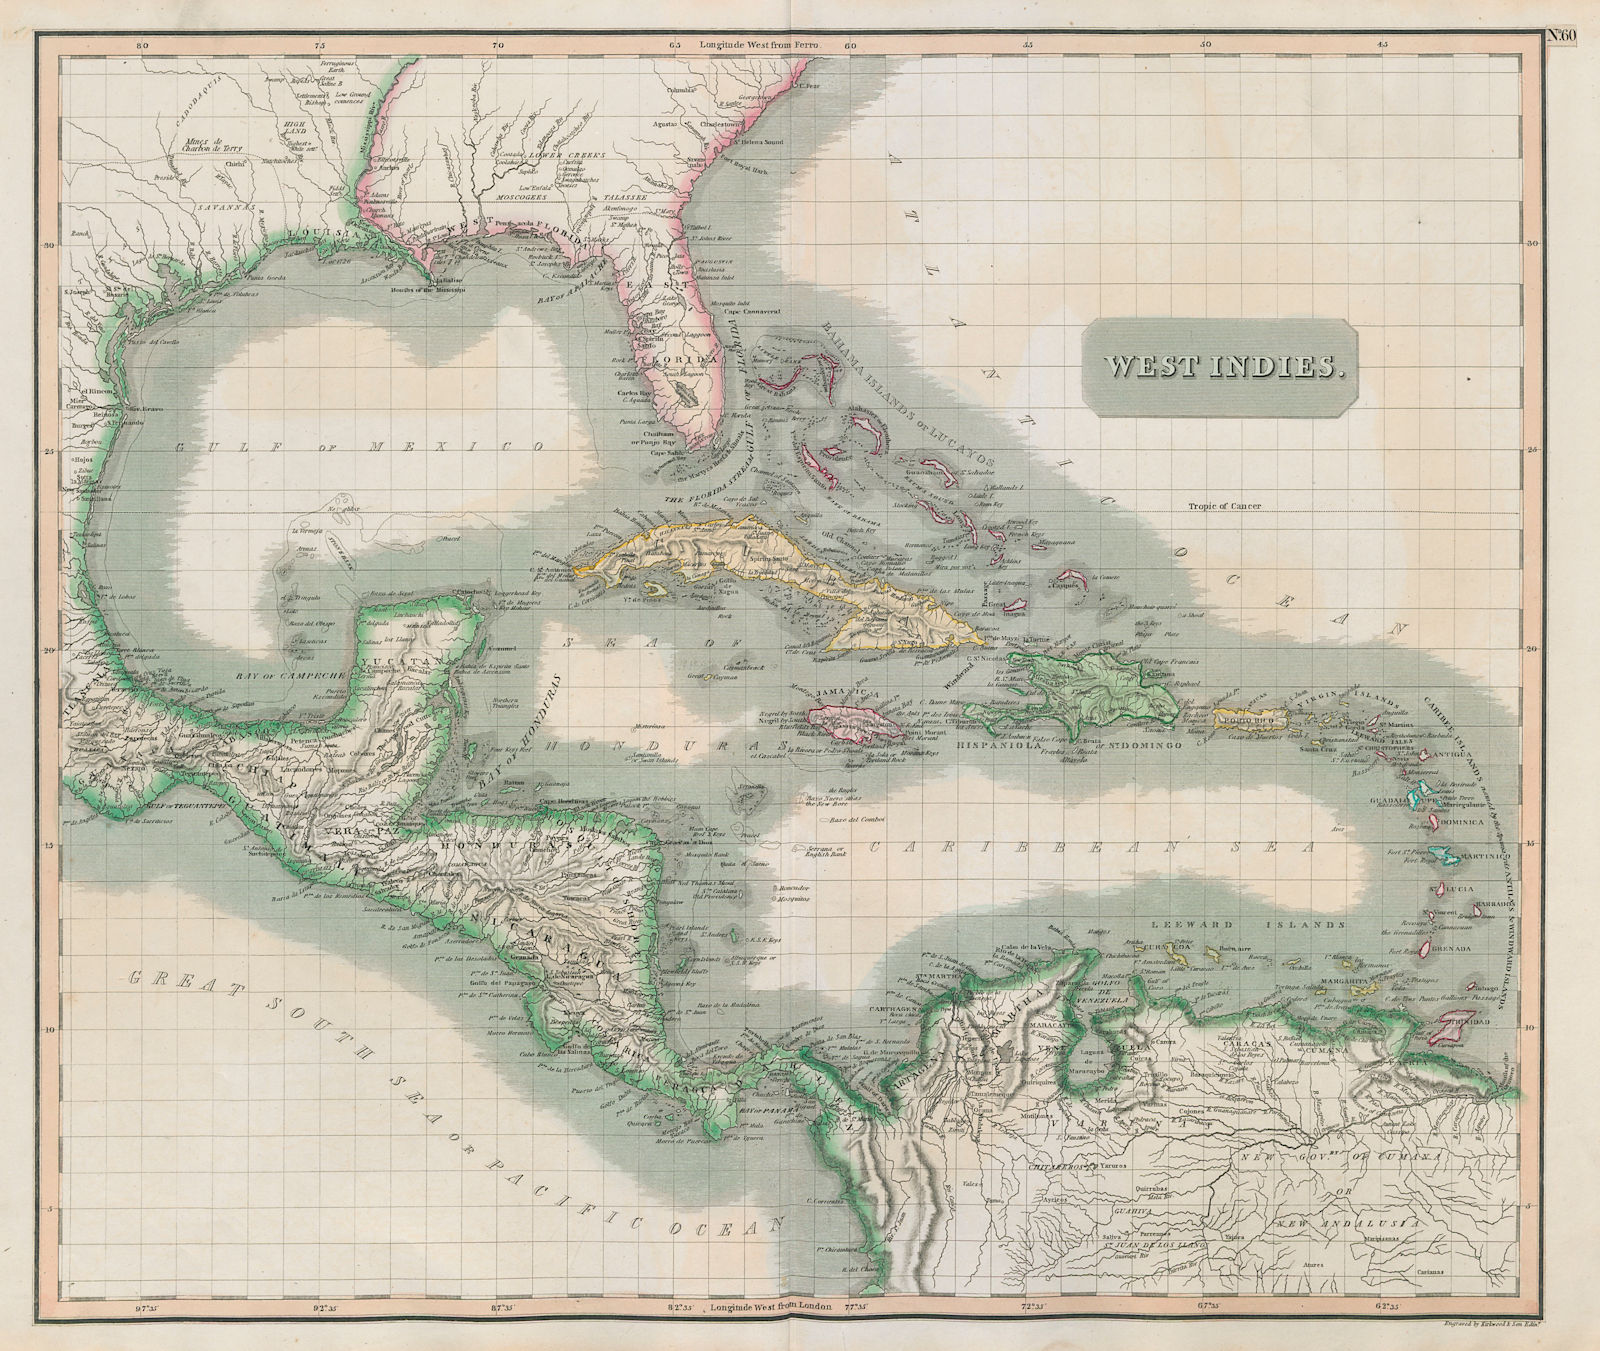 Associate Product "West Indies". Caribbean islands. Gulf of Mexico. Antilles. THOMSON 1817 map